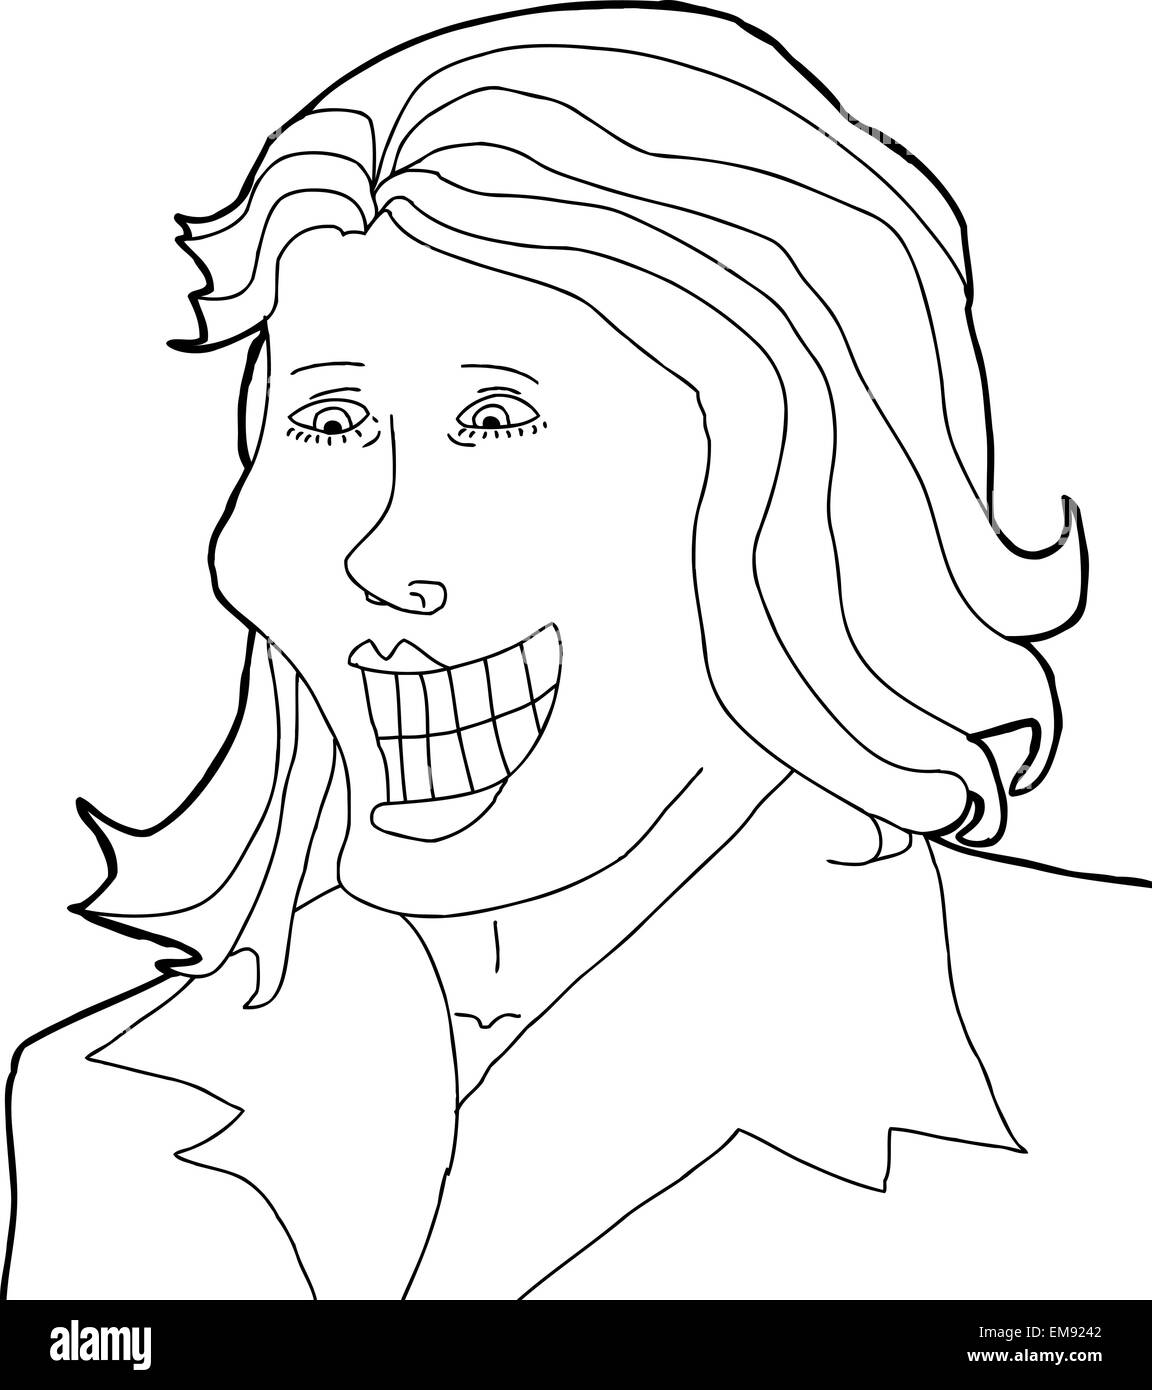 Outline drawing of happy businesswoman with smile Stock Photo